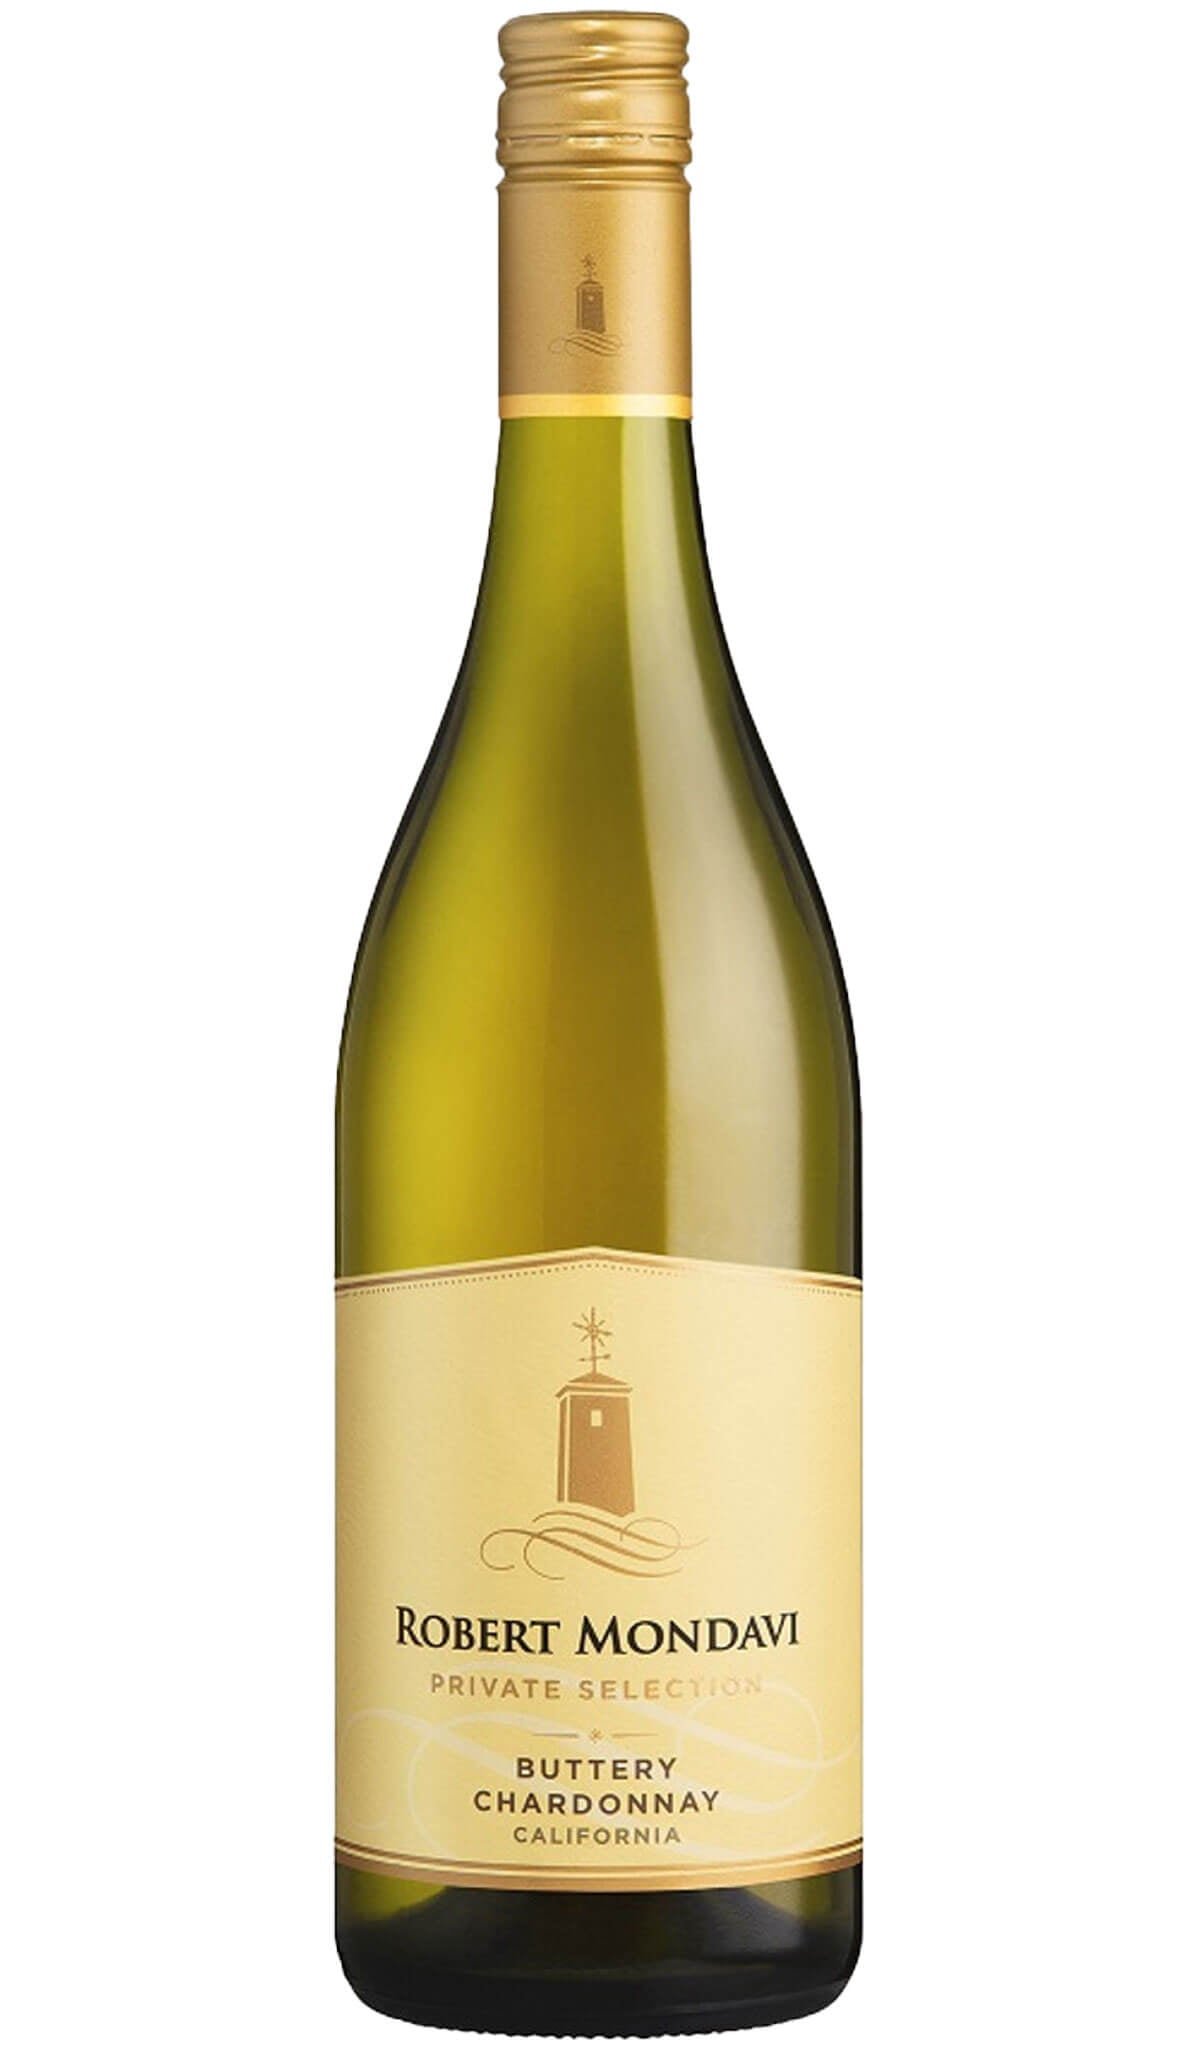 Find out more, explore the range and buy Robert Mondavi Buttery Chardonnay 2021 (California, USA) available online at Wine Sellers Direct - Australia's independent liquor specialists.